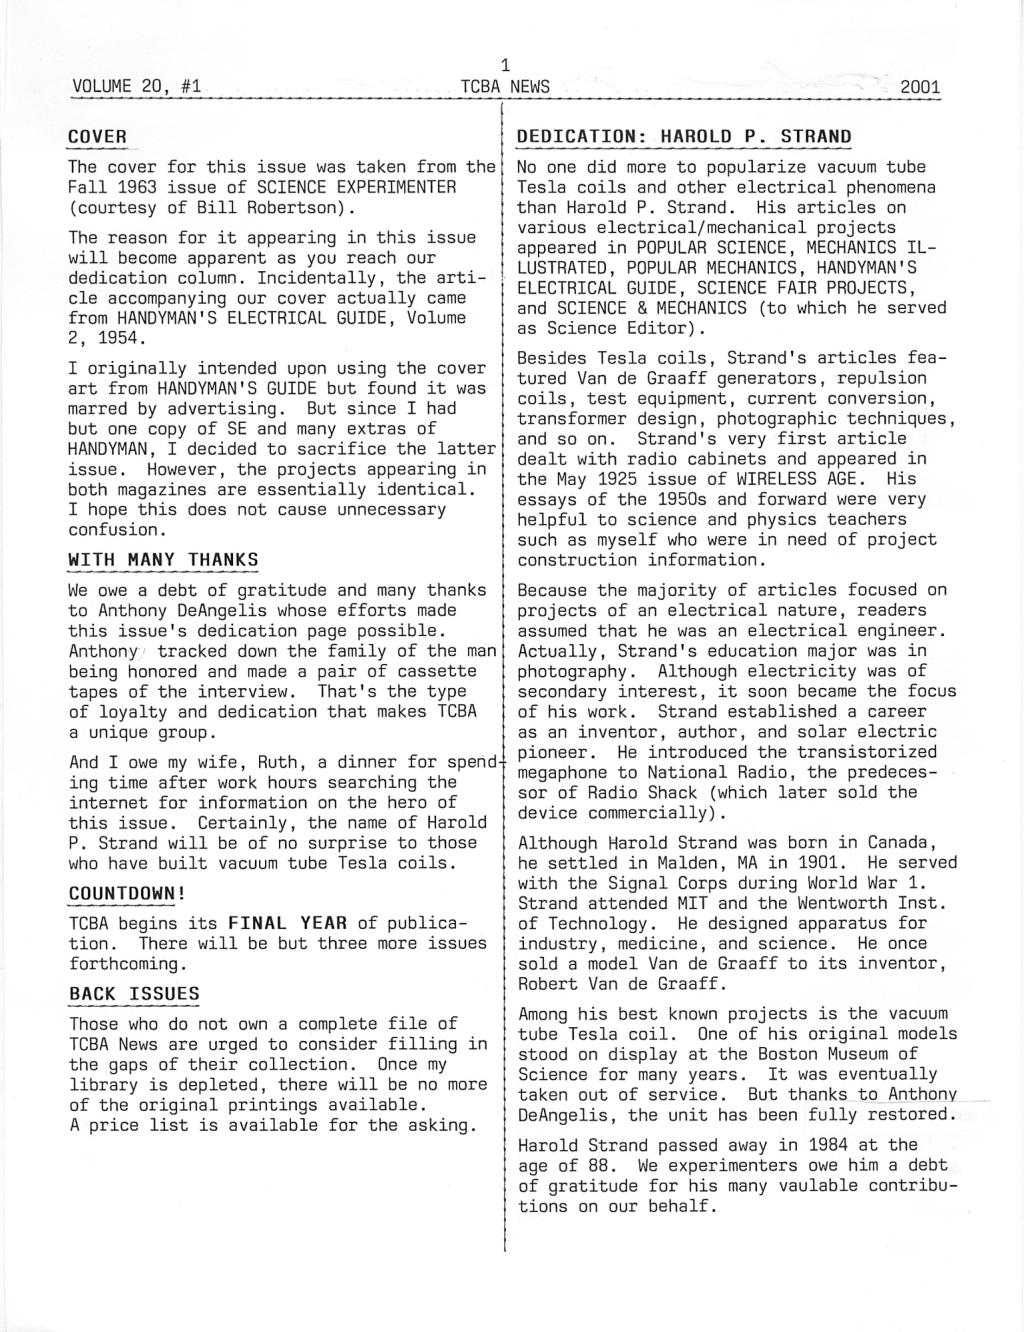 TCBA Volume 20 - Issue 1 - Page 1 of 18